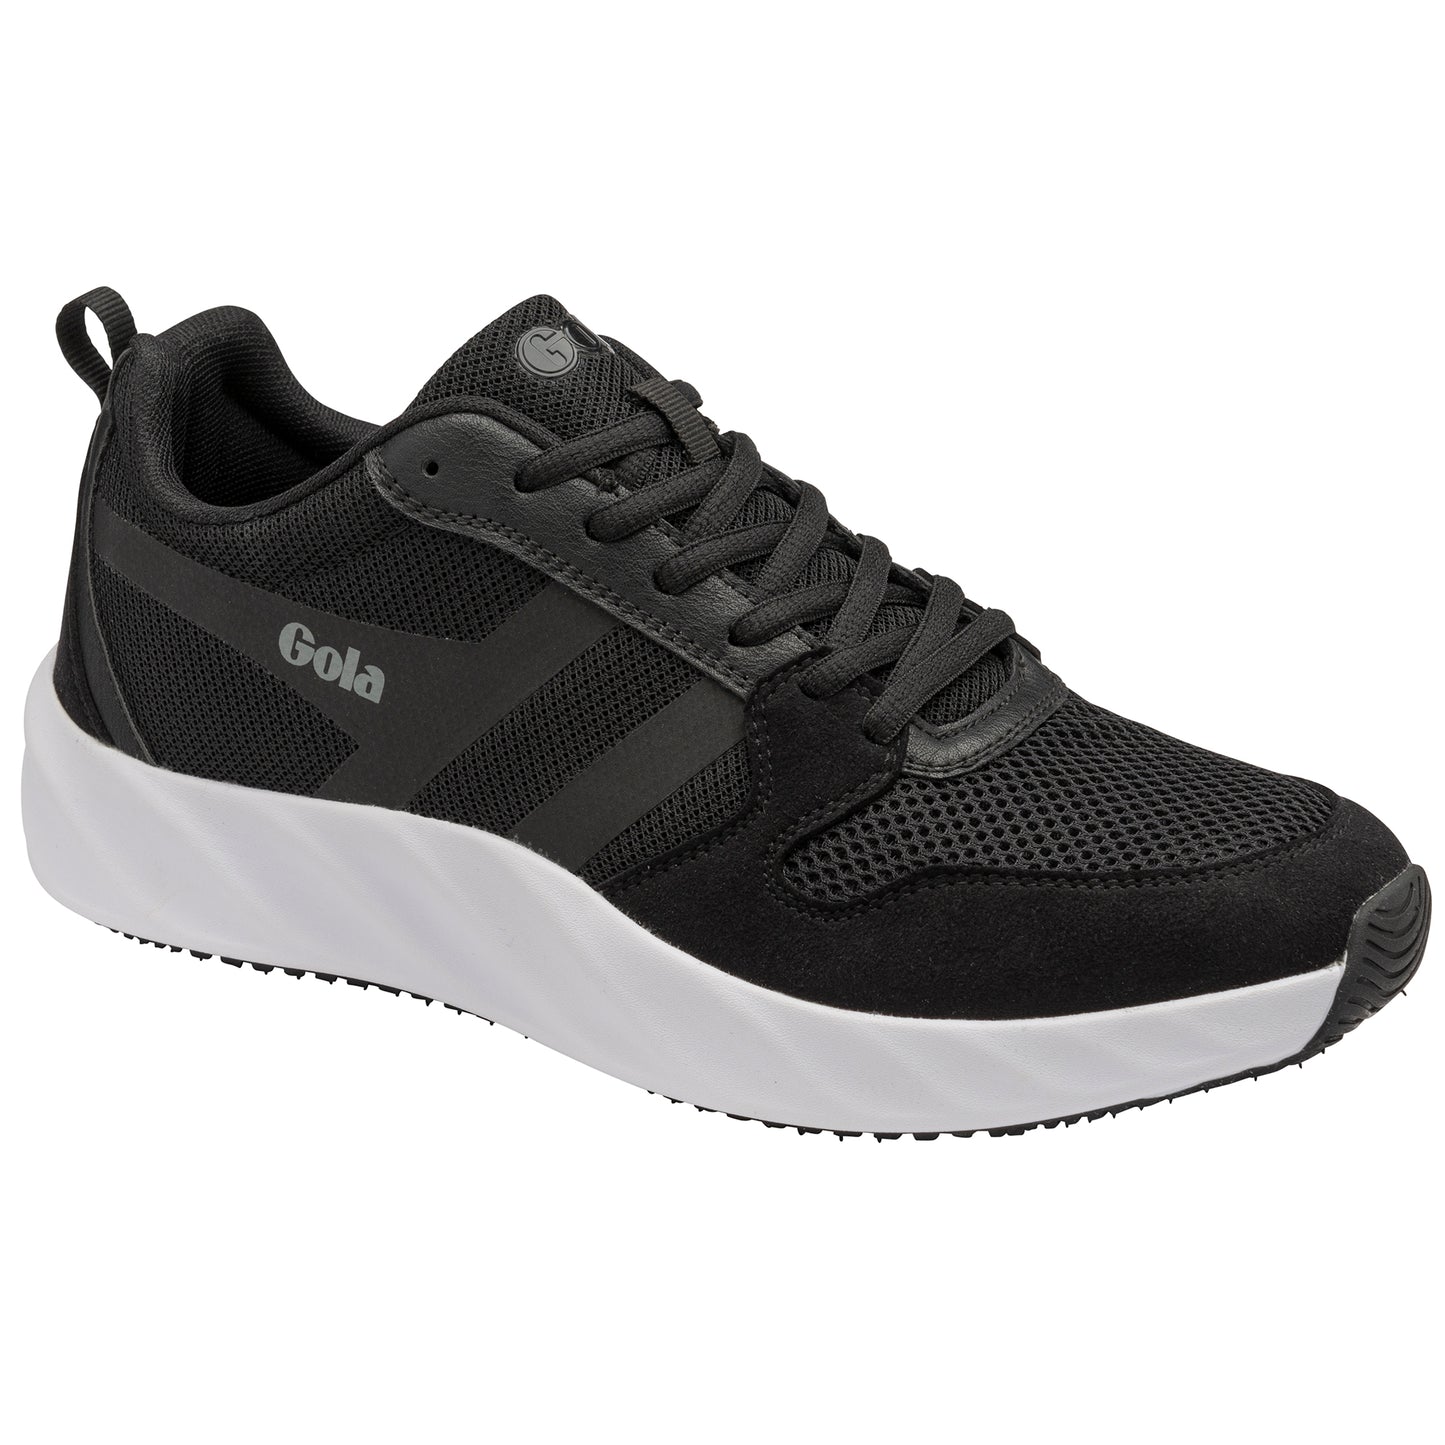 Lansen Lace-up Trainer in Black